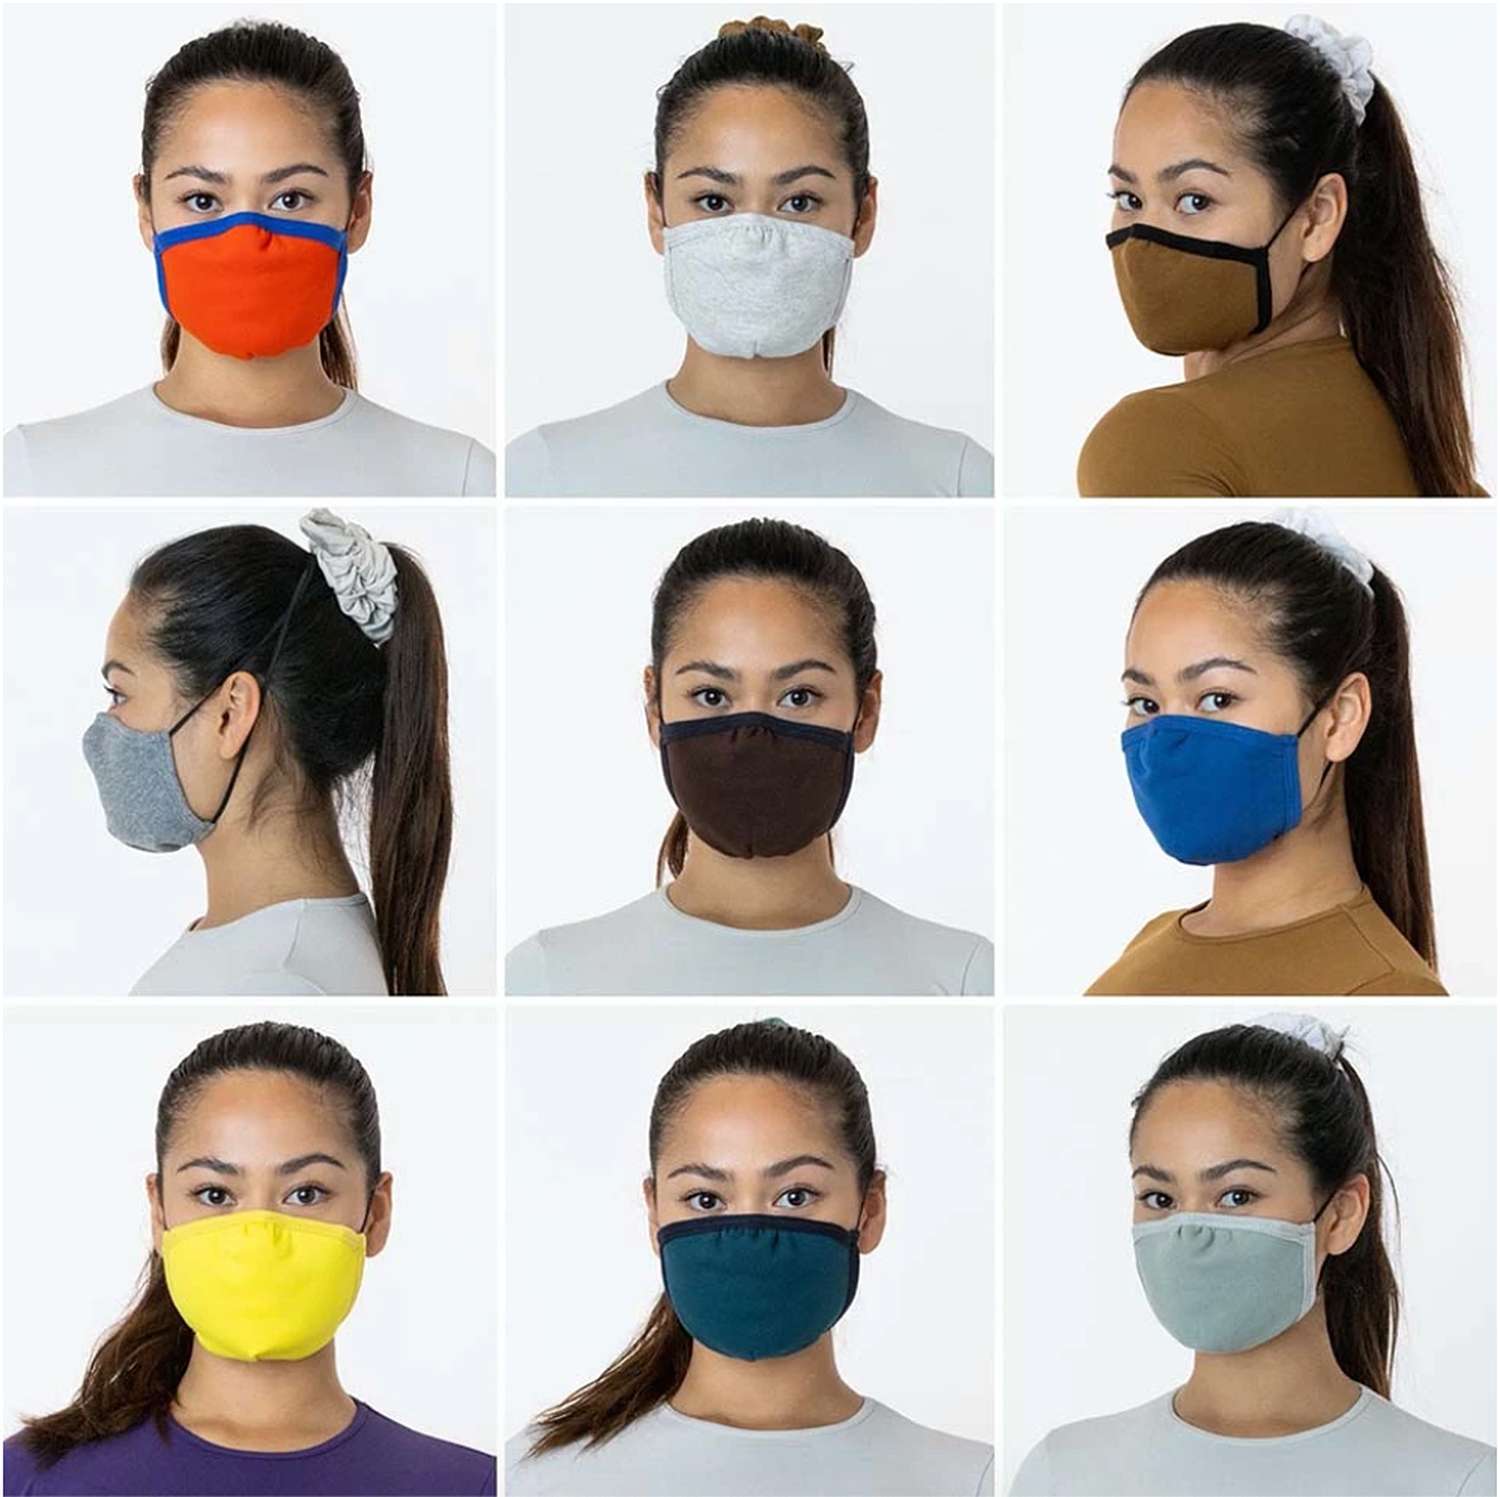 Best Cloth Face Masks Still Available Online For Coronavirus Protection People Com,Flower Graphic Design Black And White